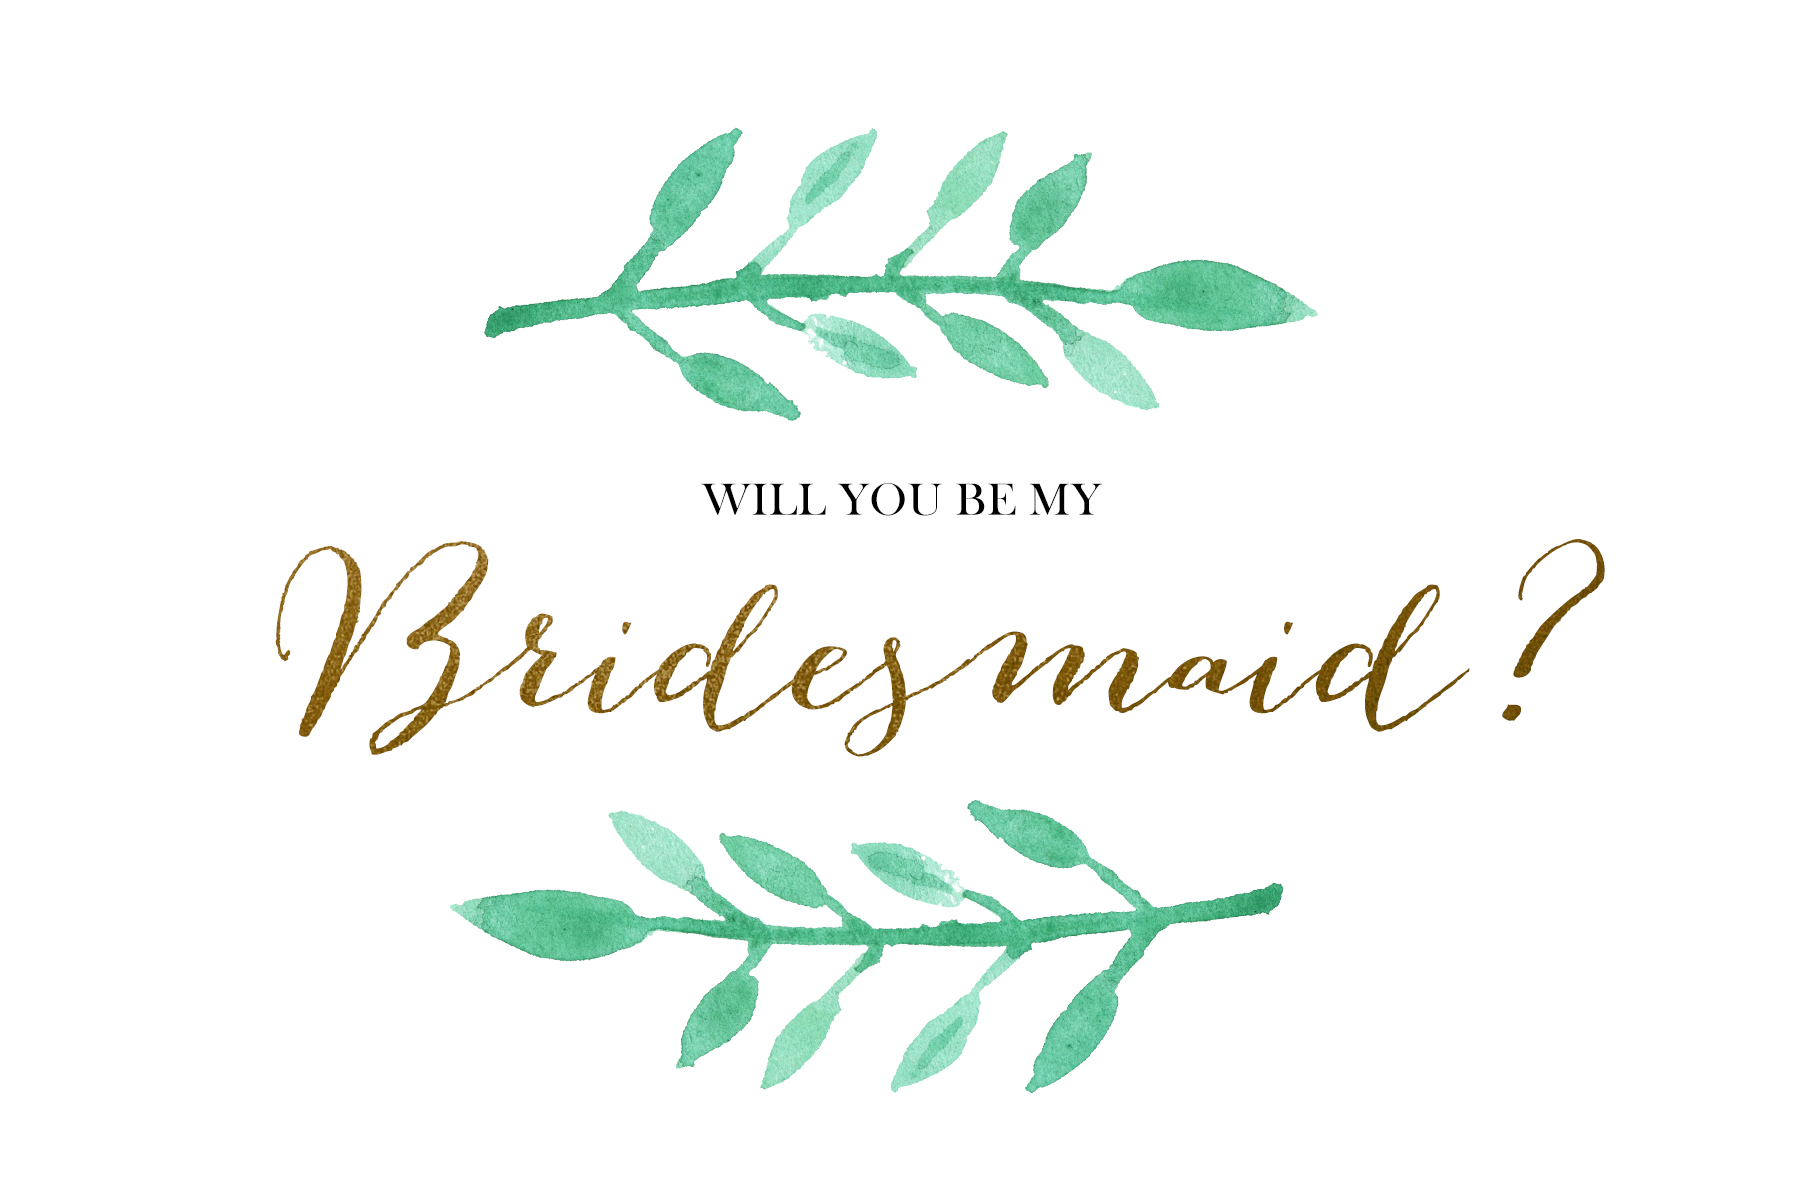 Will You Be My Bridesmaid Free Printable 6 6 X 4 • Fleurieu Weddings - Will You Be My Bridesmaid Free Printable